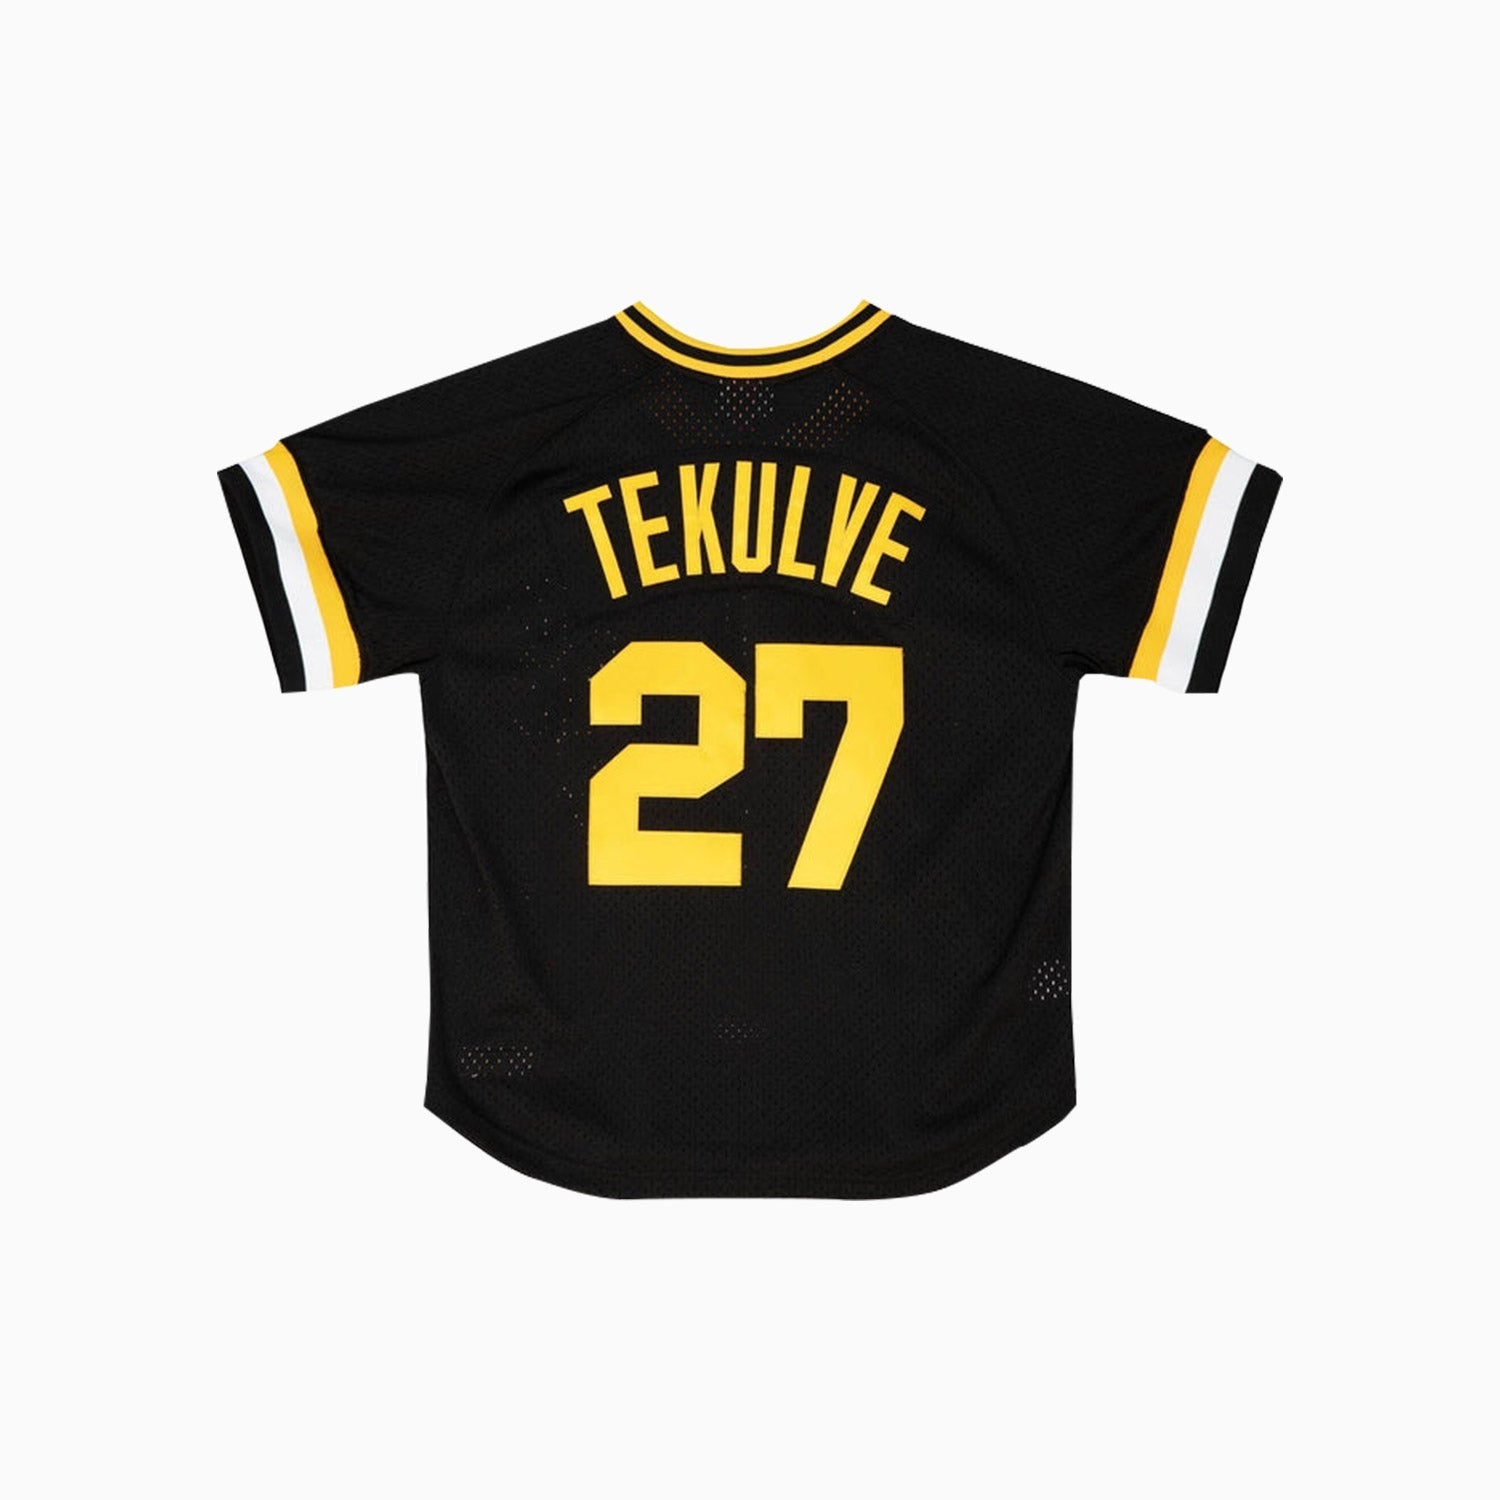 mitchell-ness-authentic-pittsburgh-pirates-kent-tekulve-1982-mlb-jersey-youth-9n3b7mbp0-pitkt-y82